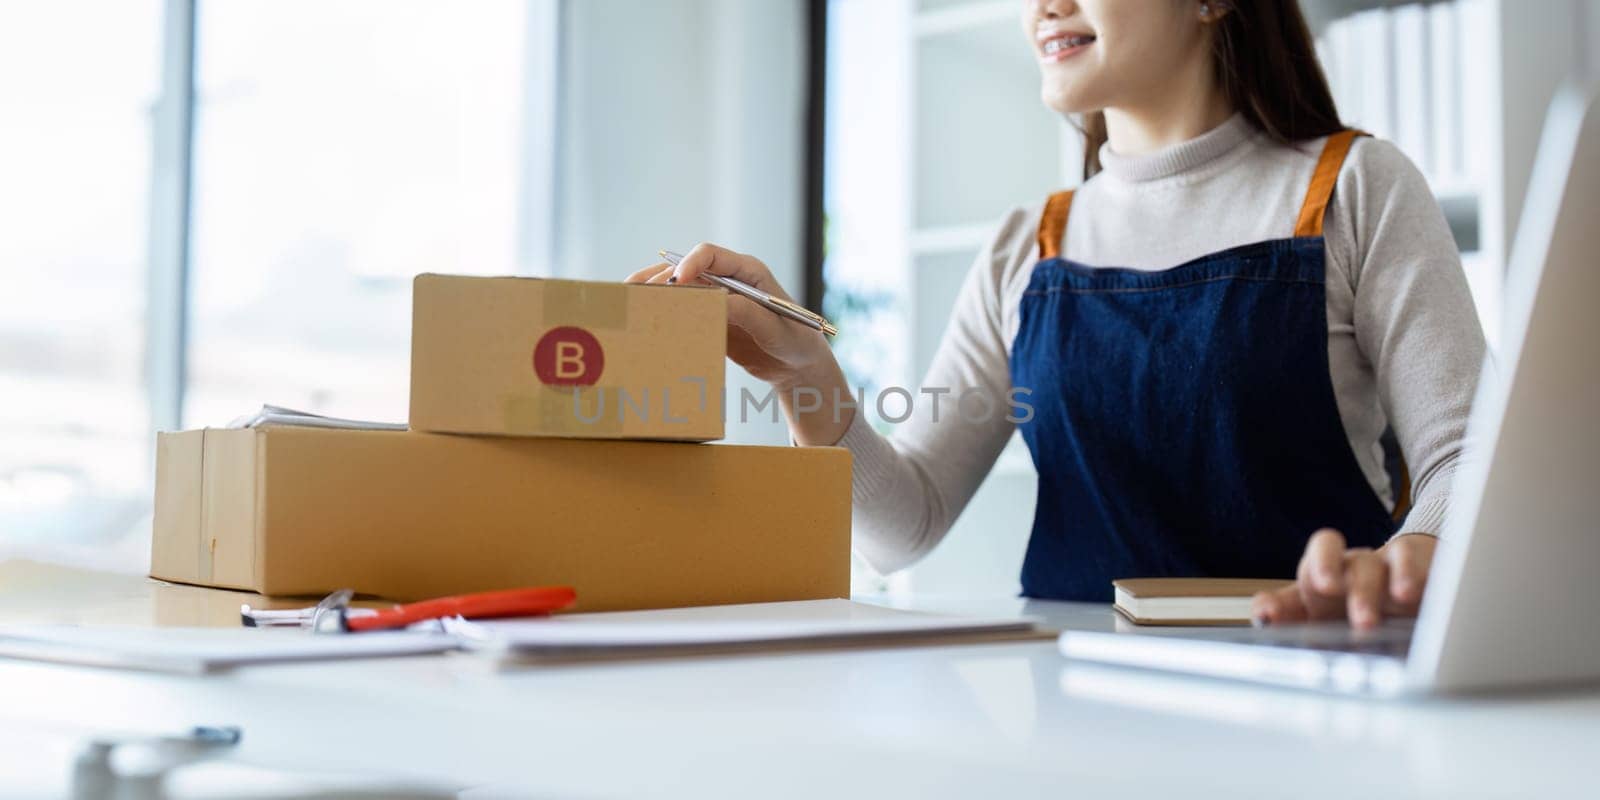 Young business woman entrepreneur online shipment business is preparing packages to send to customer. e-commerce concept.